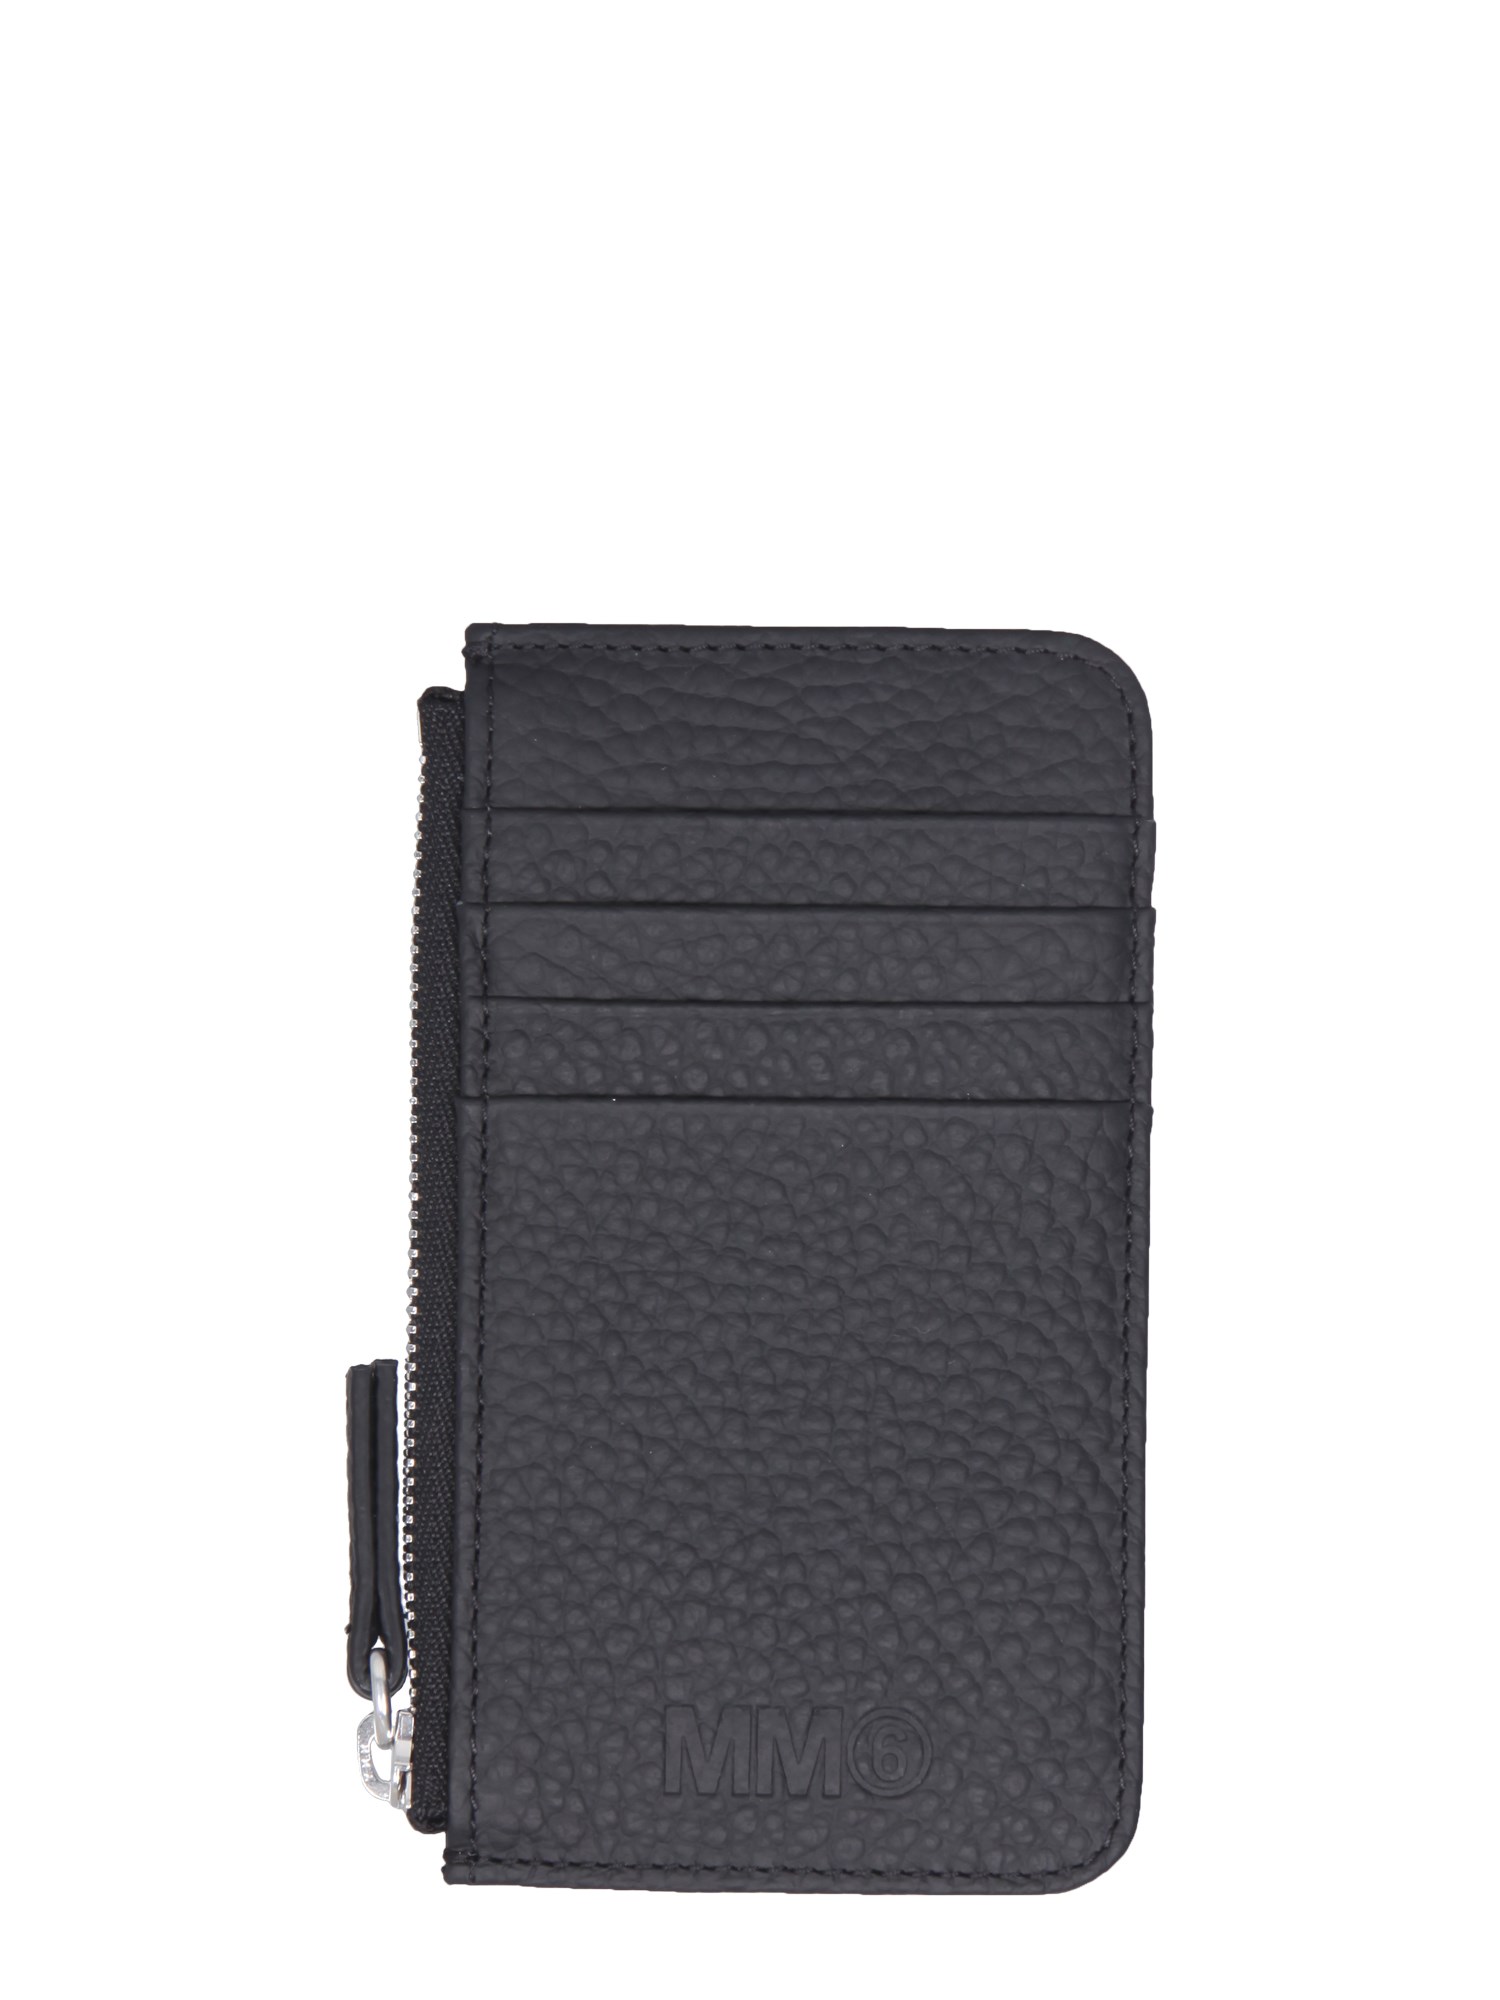 mm6 maison margiela small card holder with zip